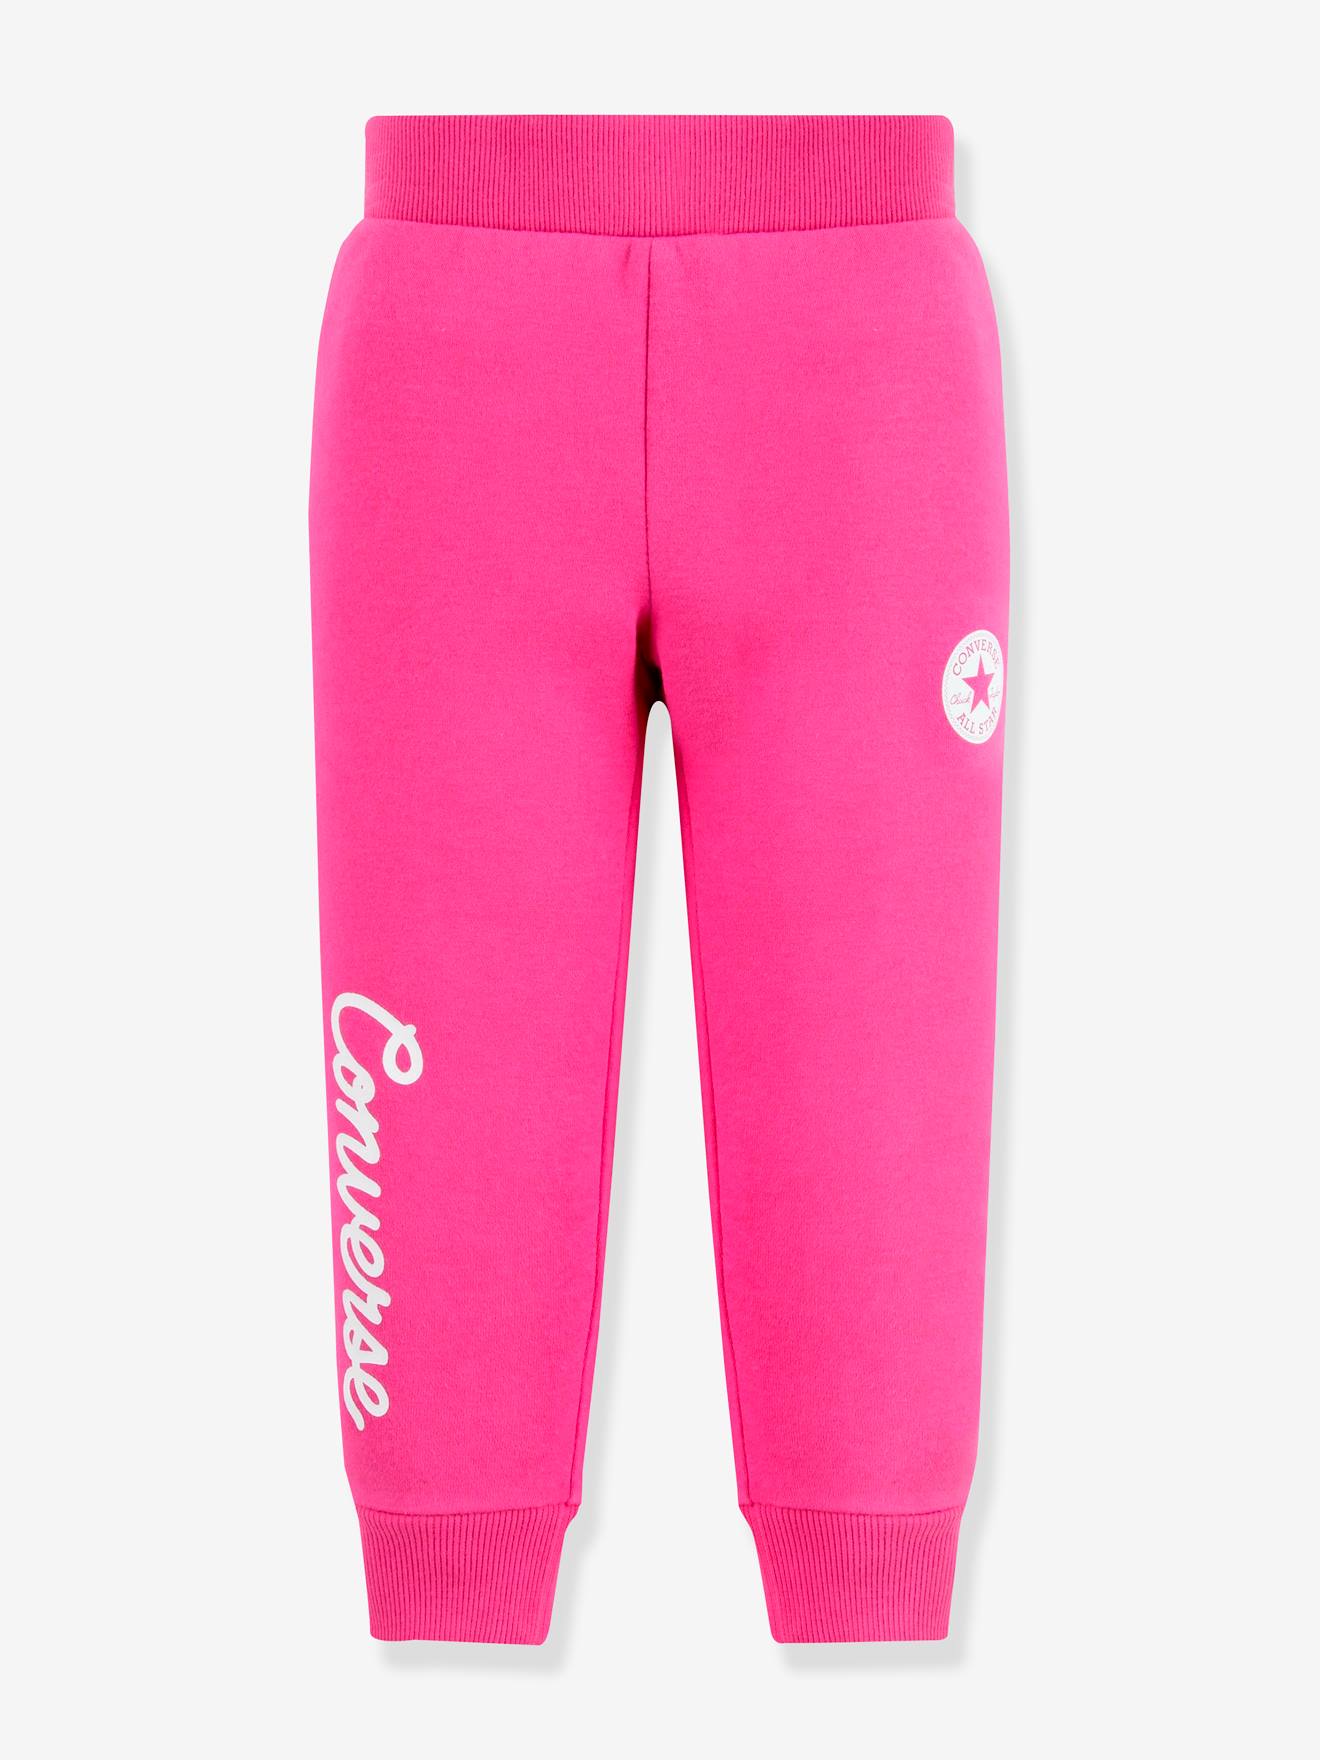 Joggers for Children, Chuck Patch by CONVERSE - rose, Girls | Vertbaudet